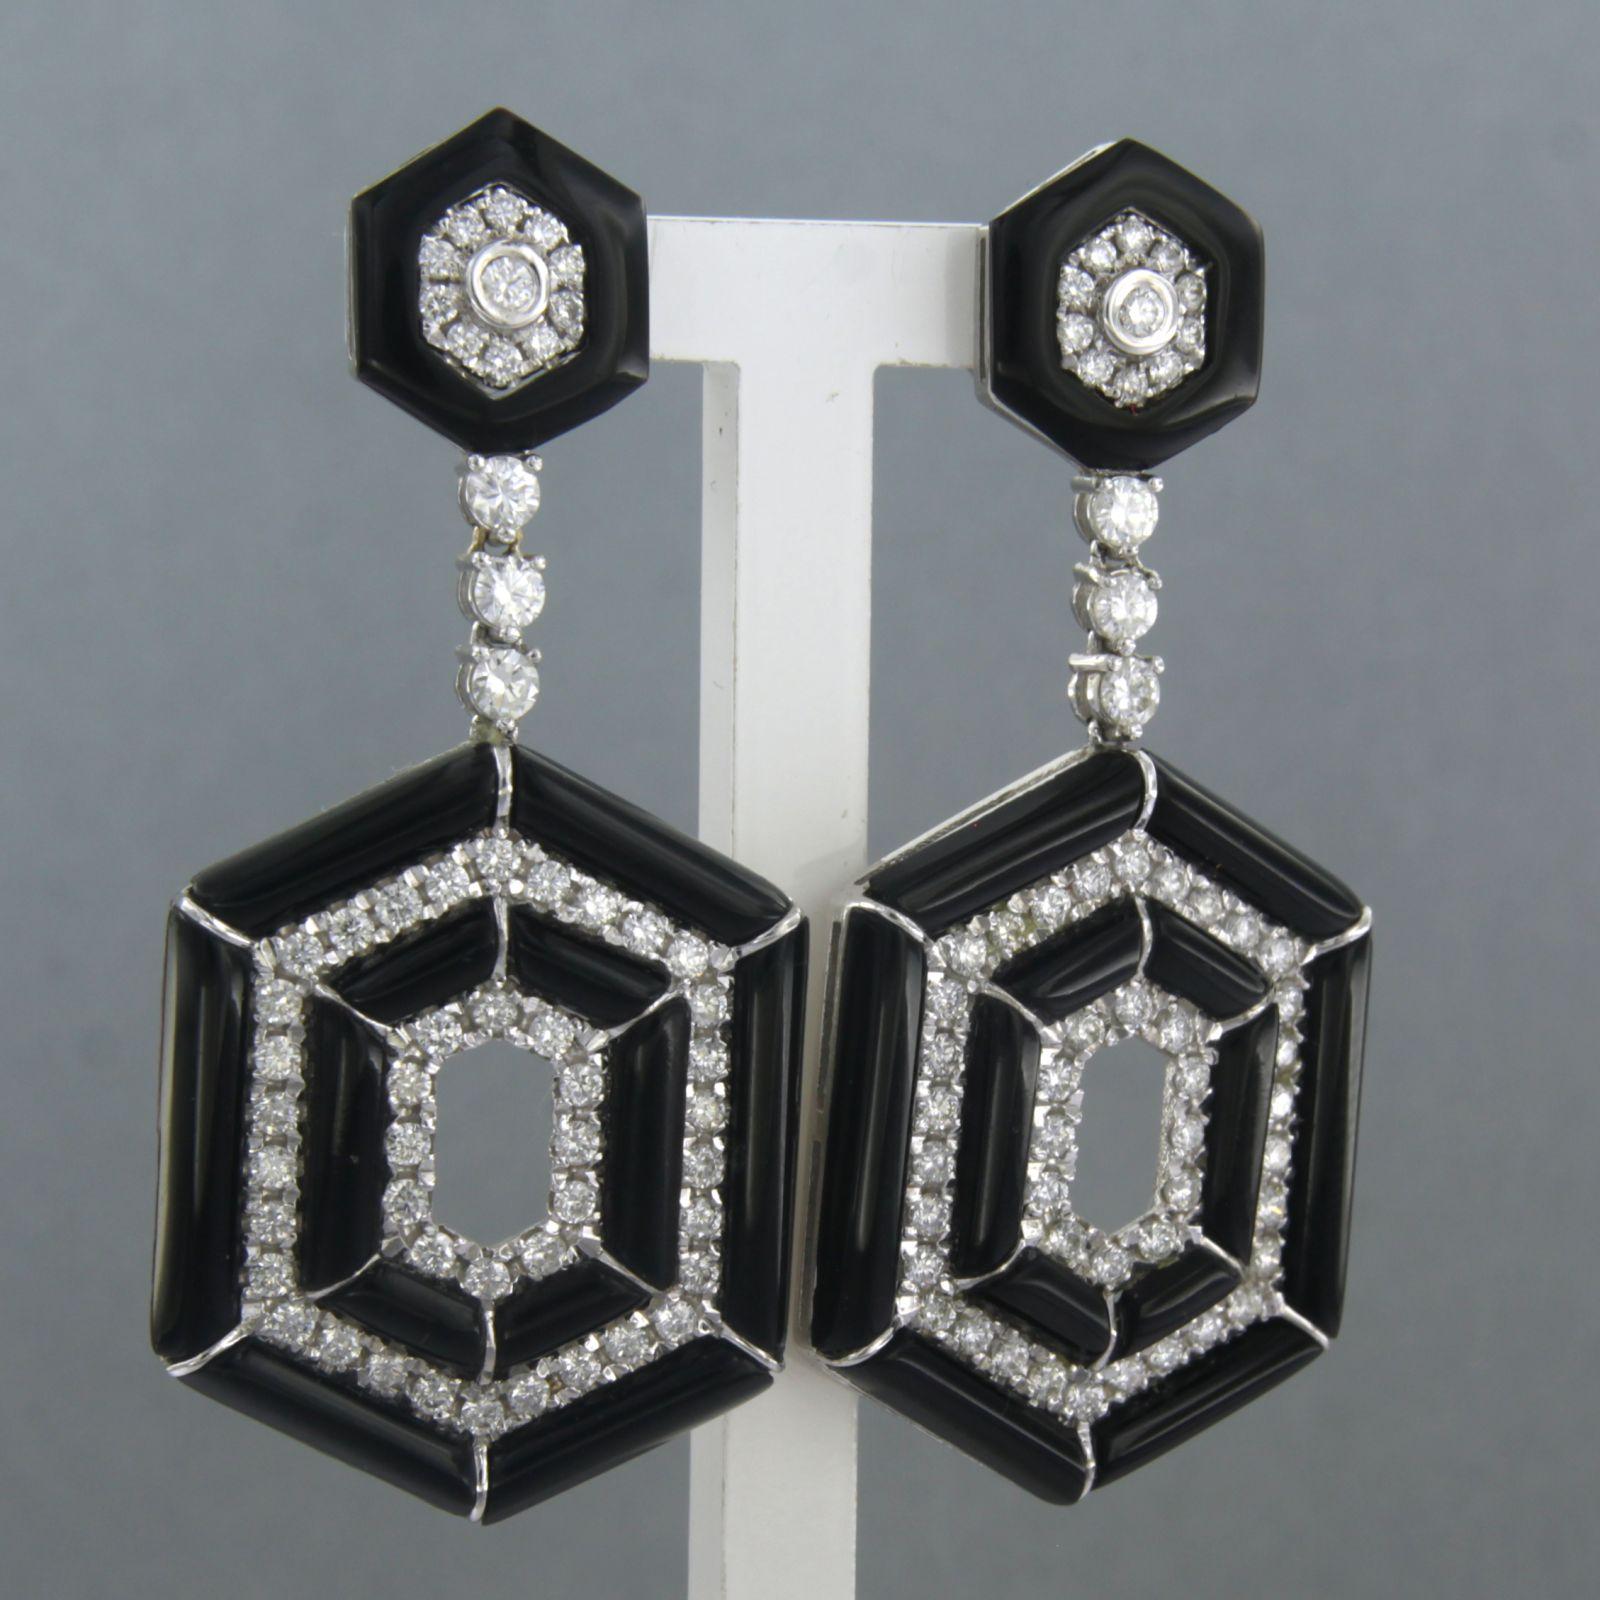 14k white gold earrings set with onyx and brilliant cut diamonds 2.20ct - F/G - VS/SI

Detailed description:

The earring is 4.5 cm long by 2.1 mm wide

weight 13.1 grams

Set with

- 2 x 10 mm octagon shape cut onyx

- 24 x 5.5 mm - 15 mm trapezium